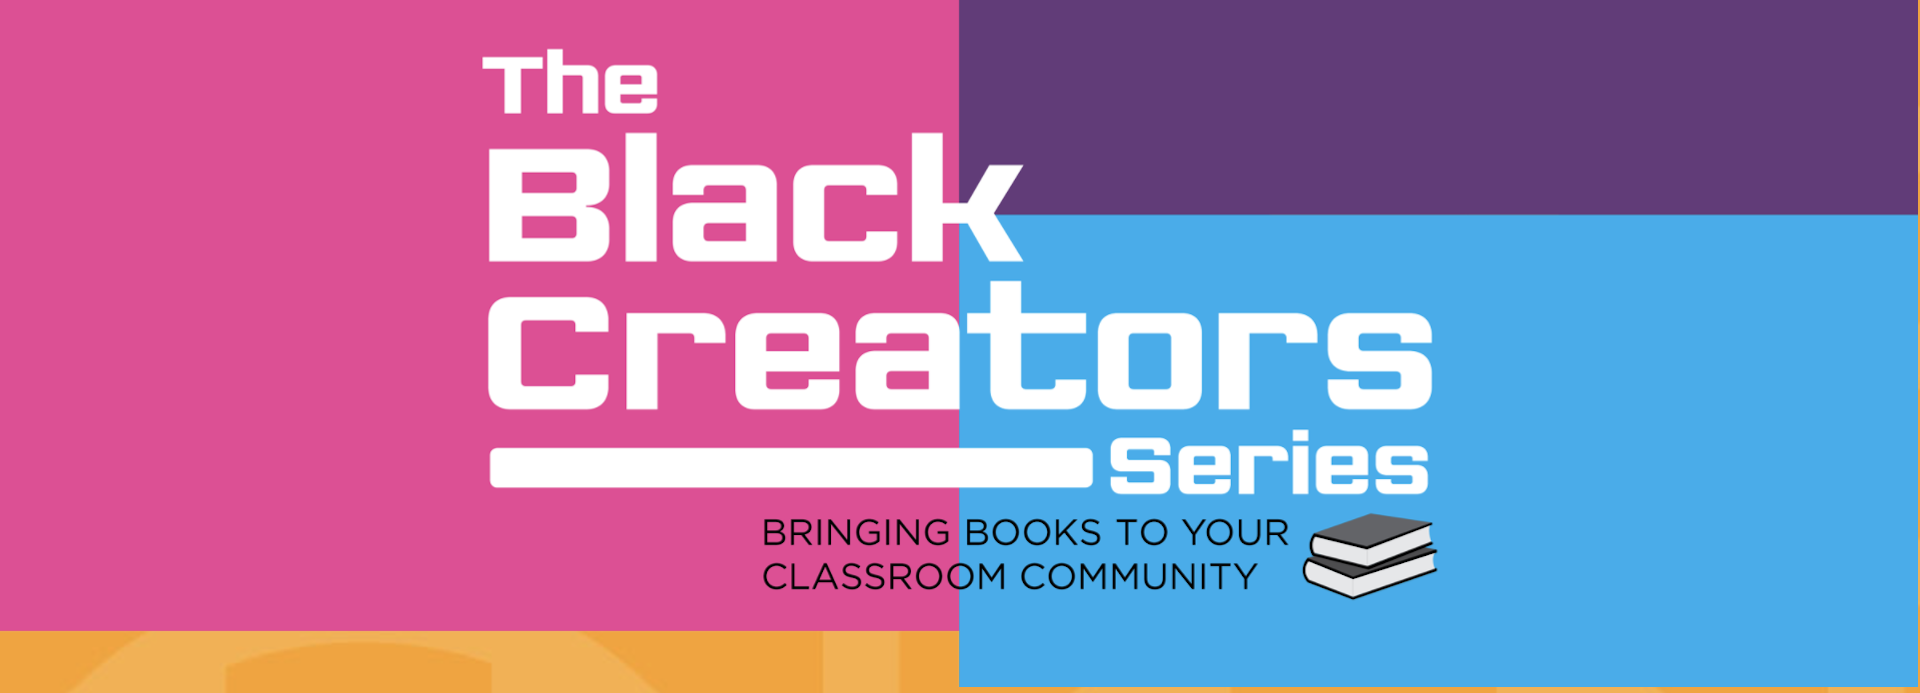 The Black Creator Series Bringing Books To Your Classroom Community information page